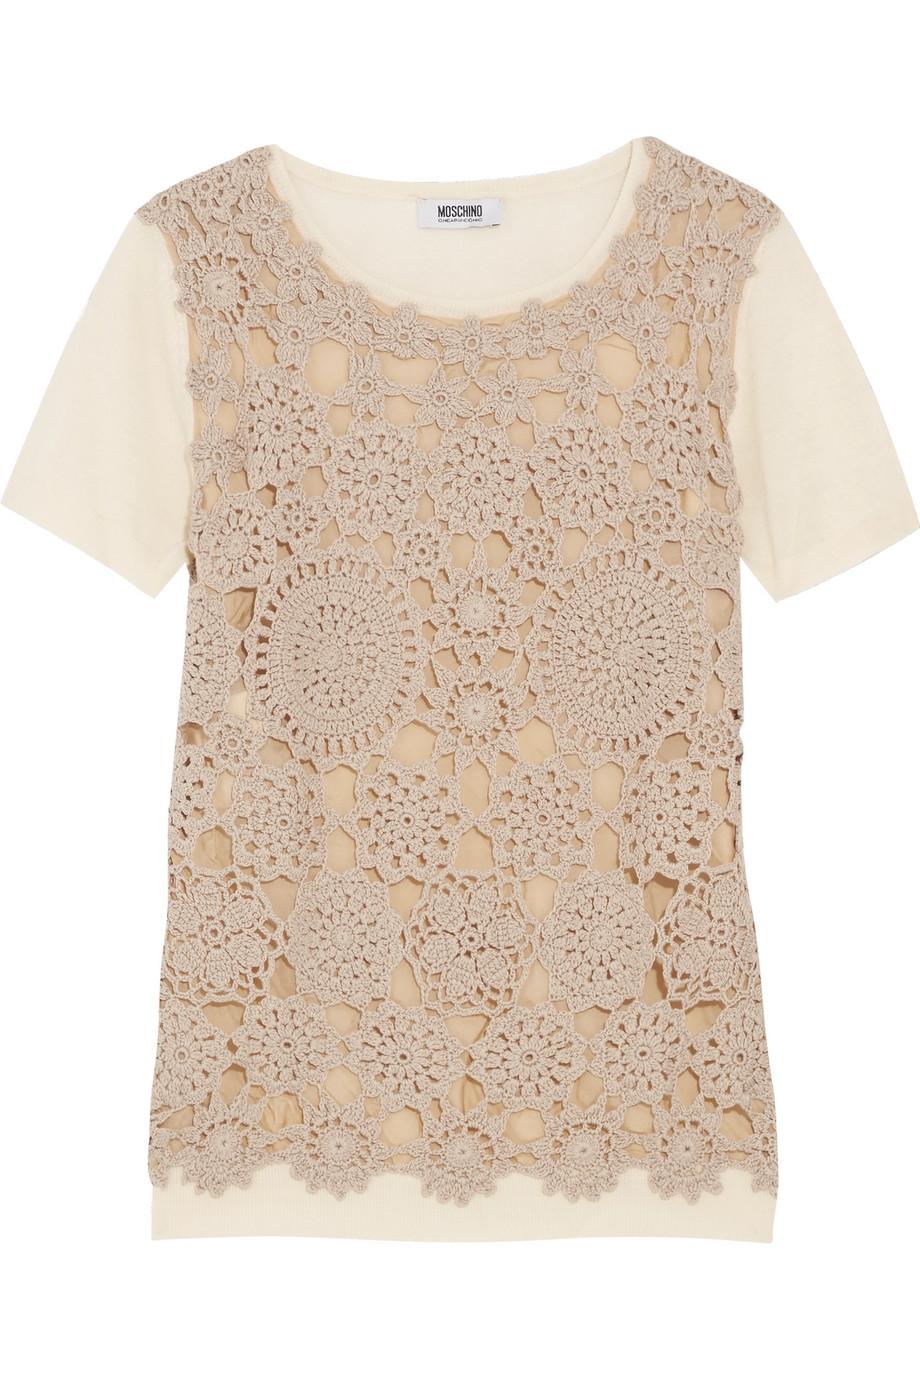 Boutique Moschino Crochet-paneled Silk And Wool Top | ModeSens